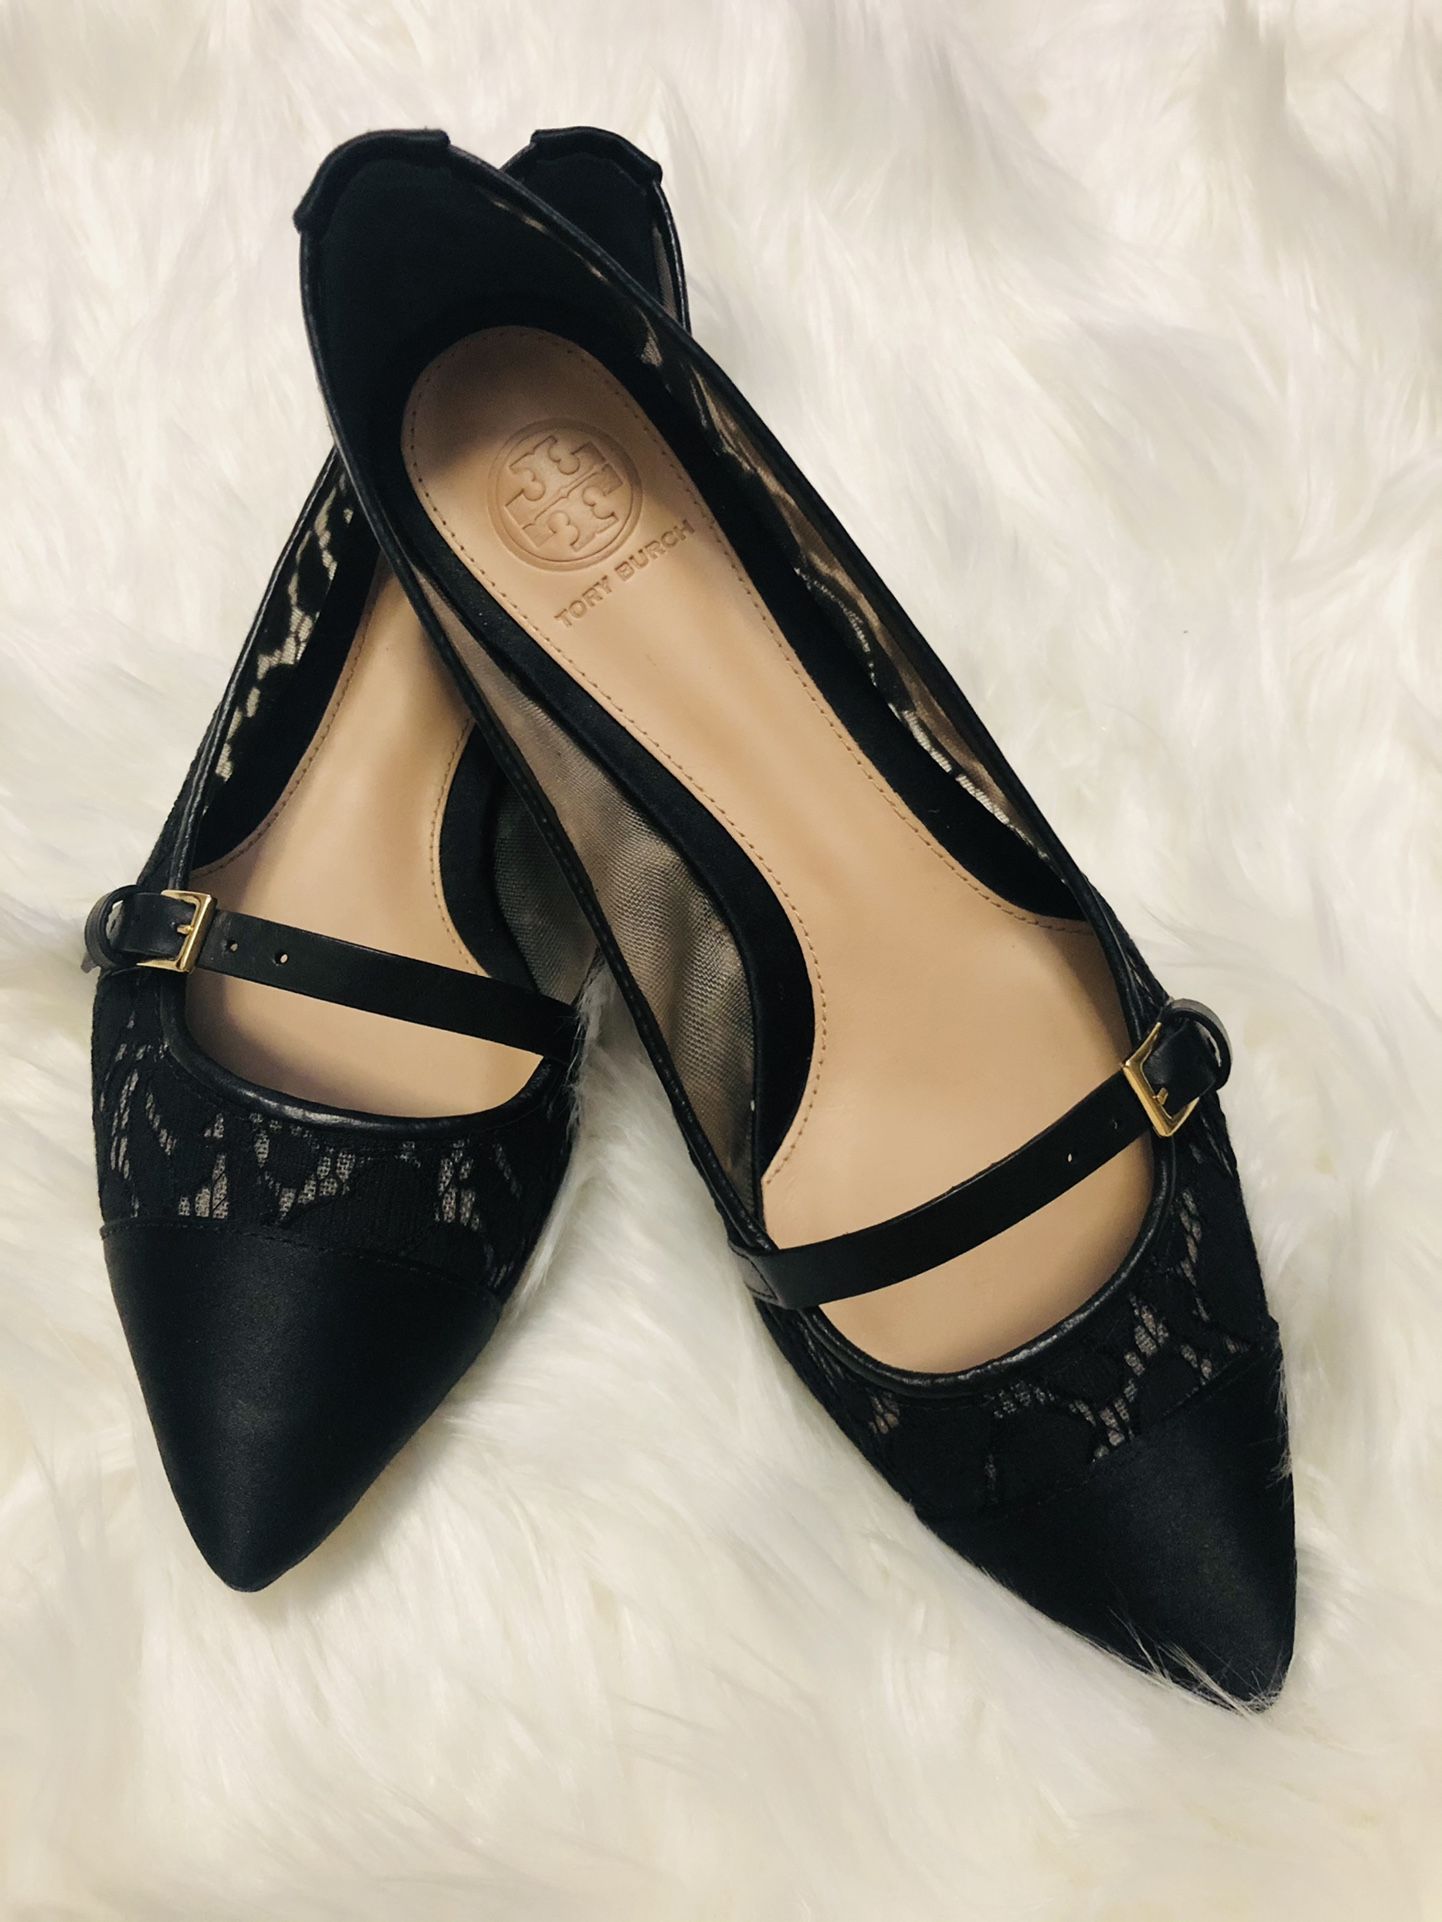 Tory Burch Lace Satin Pointed Toe Flats 